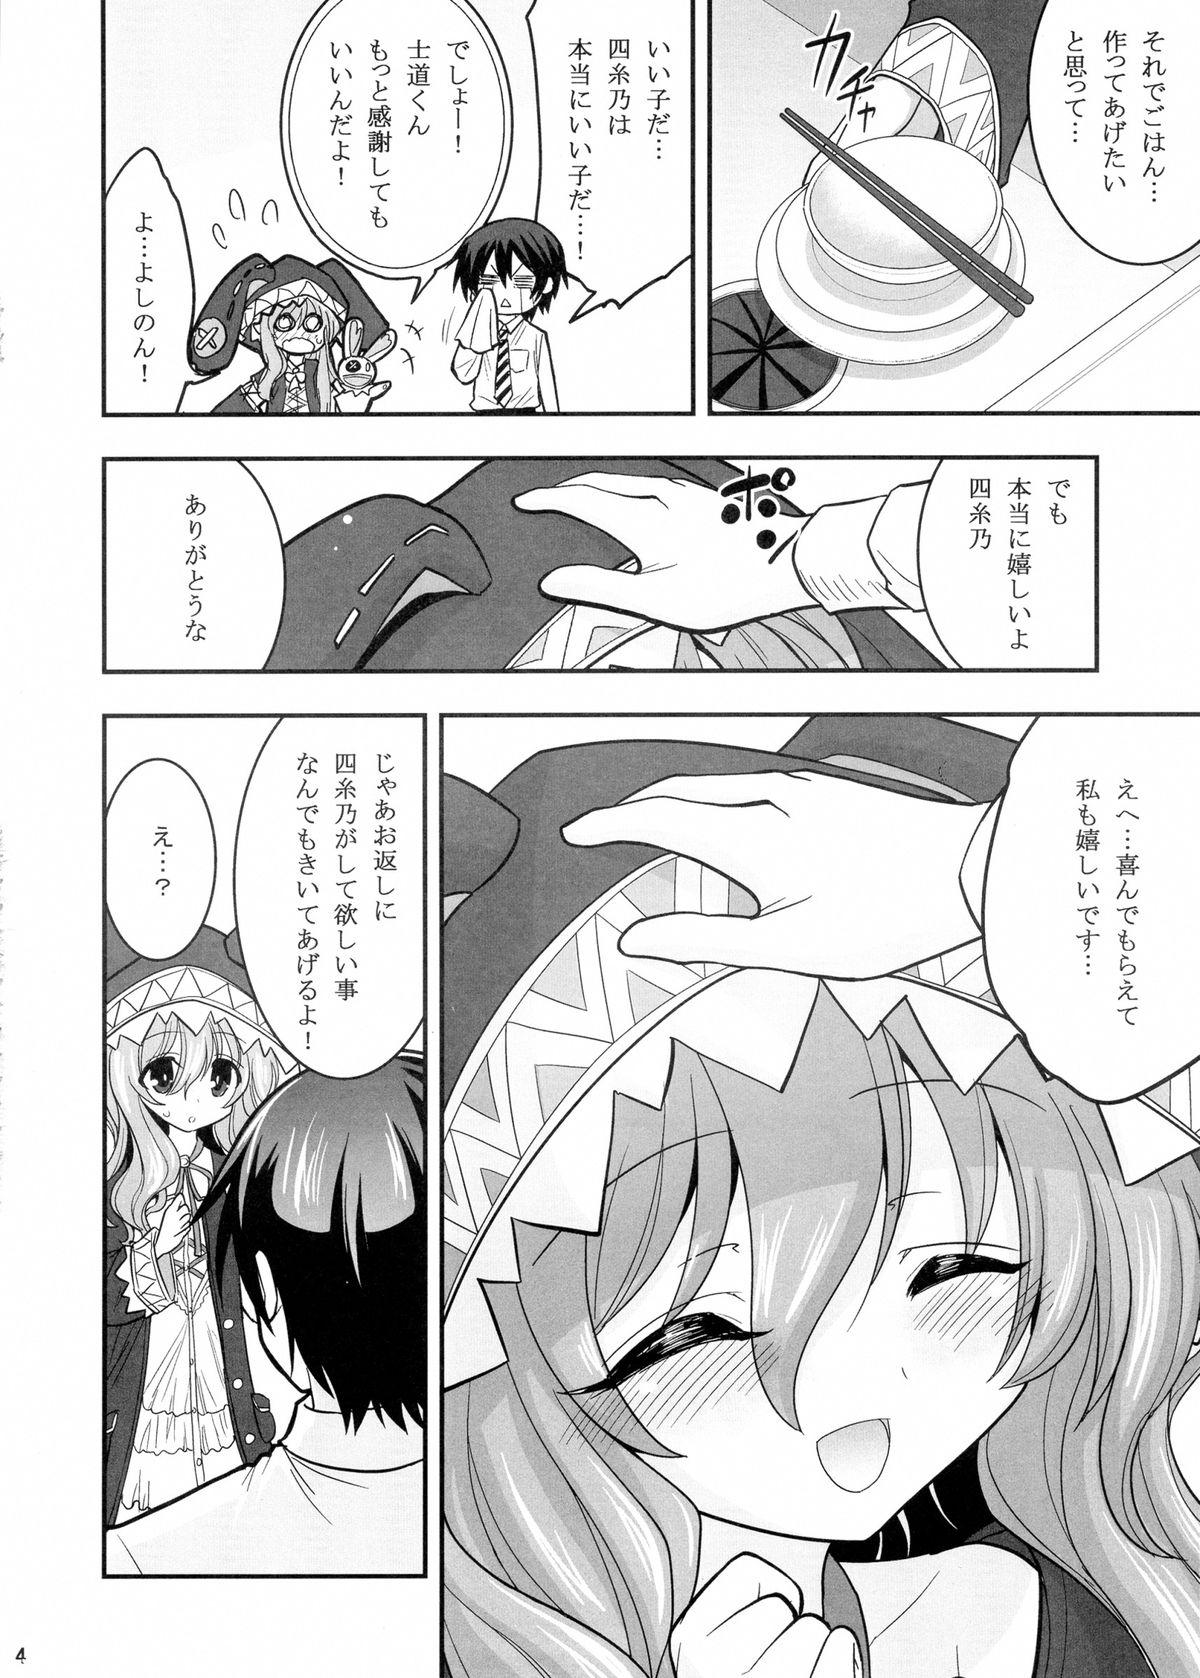 Buceta Yoshino Date After - Date a live Stepsiblings - Page 4